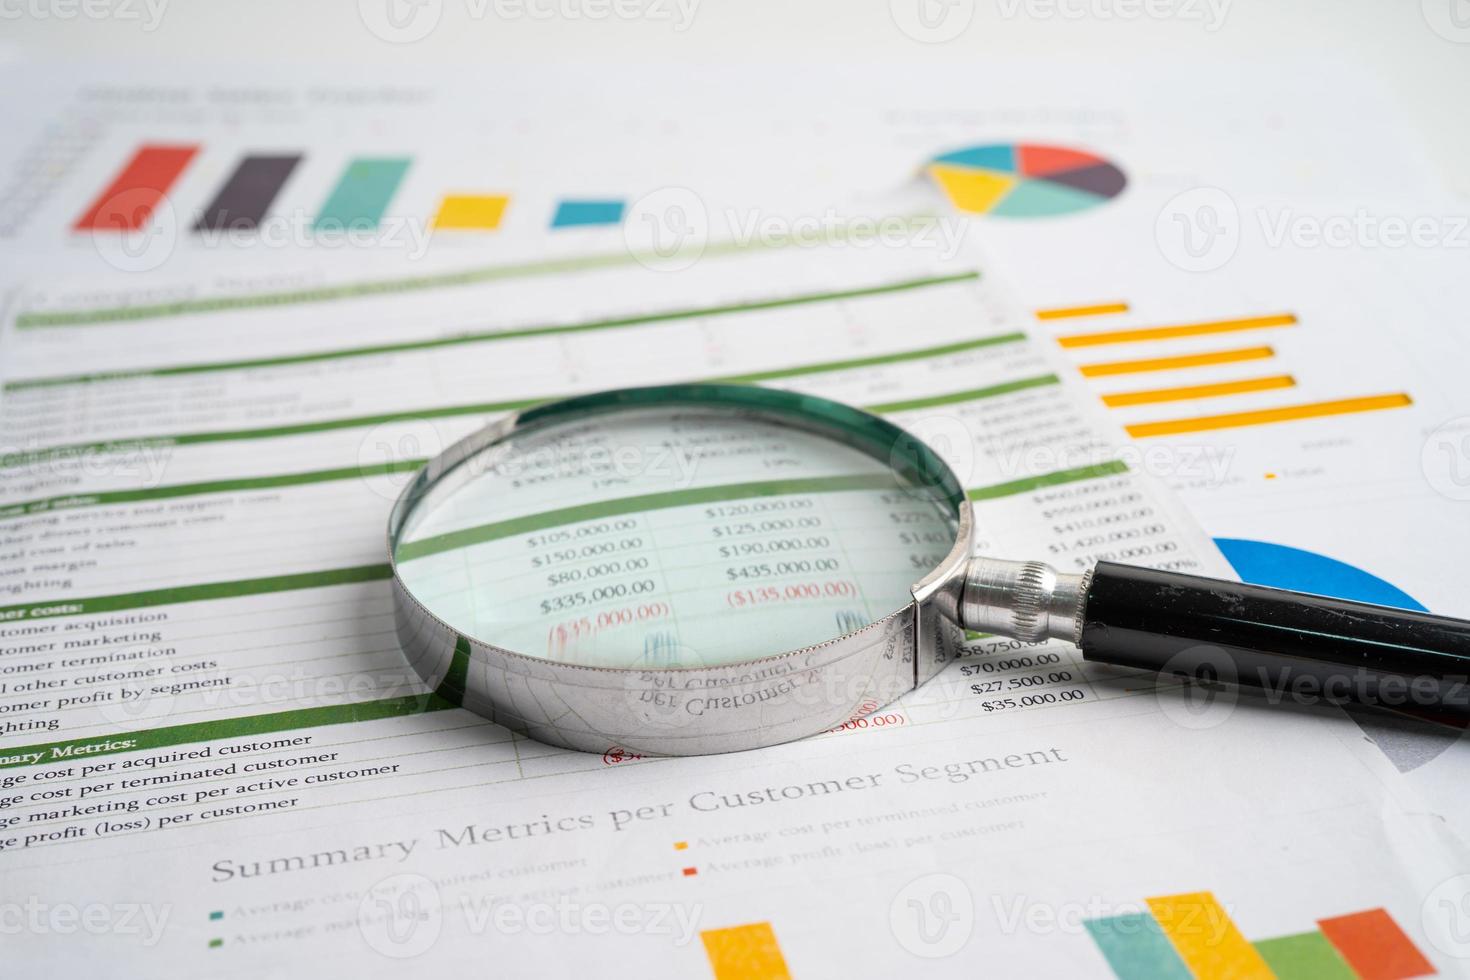 Magnifying glass on charts graphs paper. Financial development, Banking Account, Statistics, Investment Analytic research data economy, Stock exchange trading, Business office concept. photo